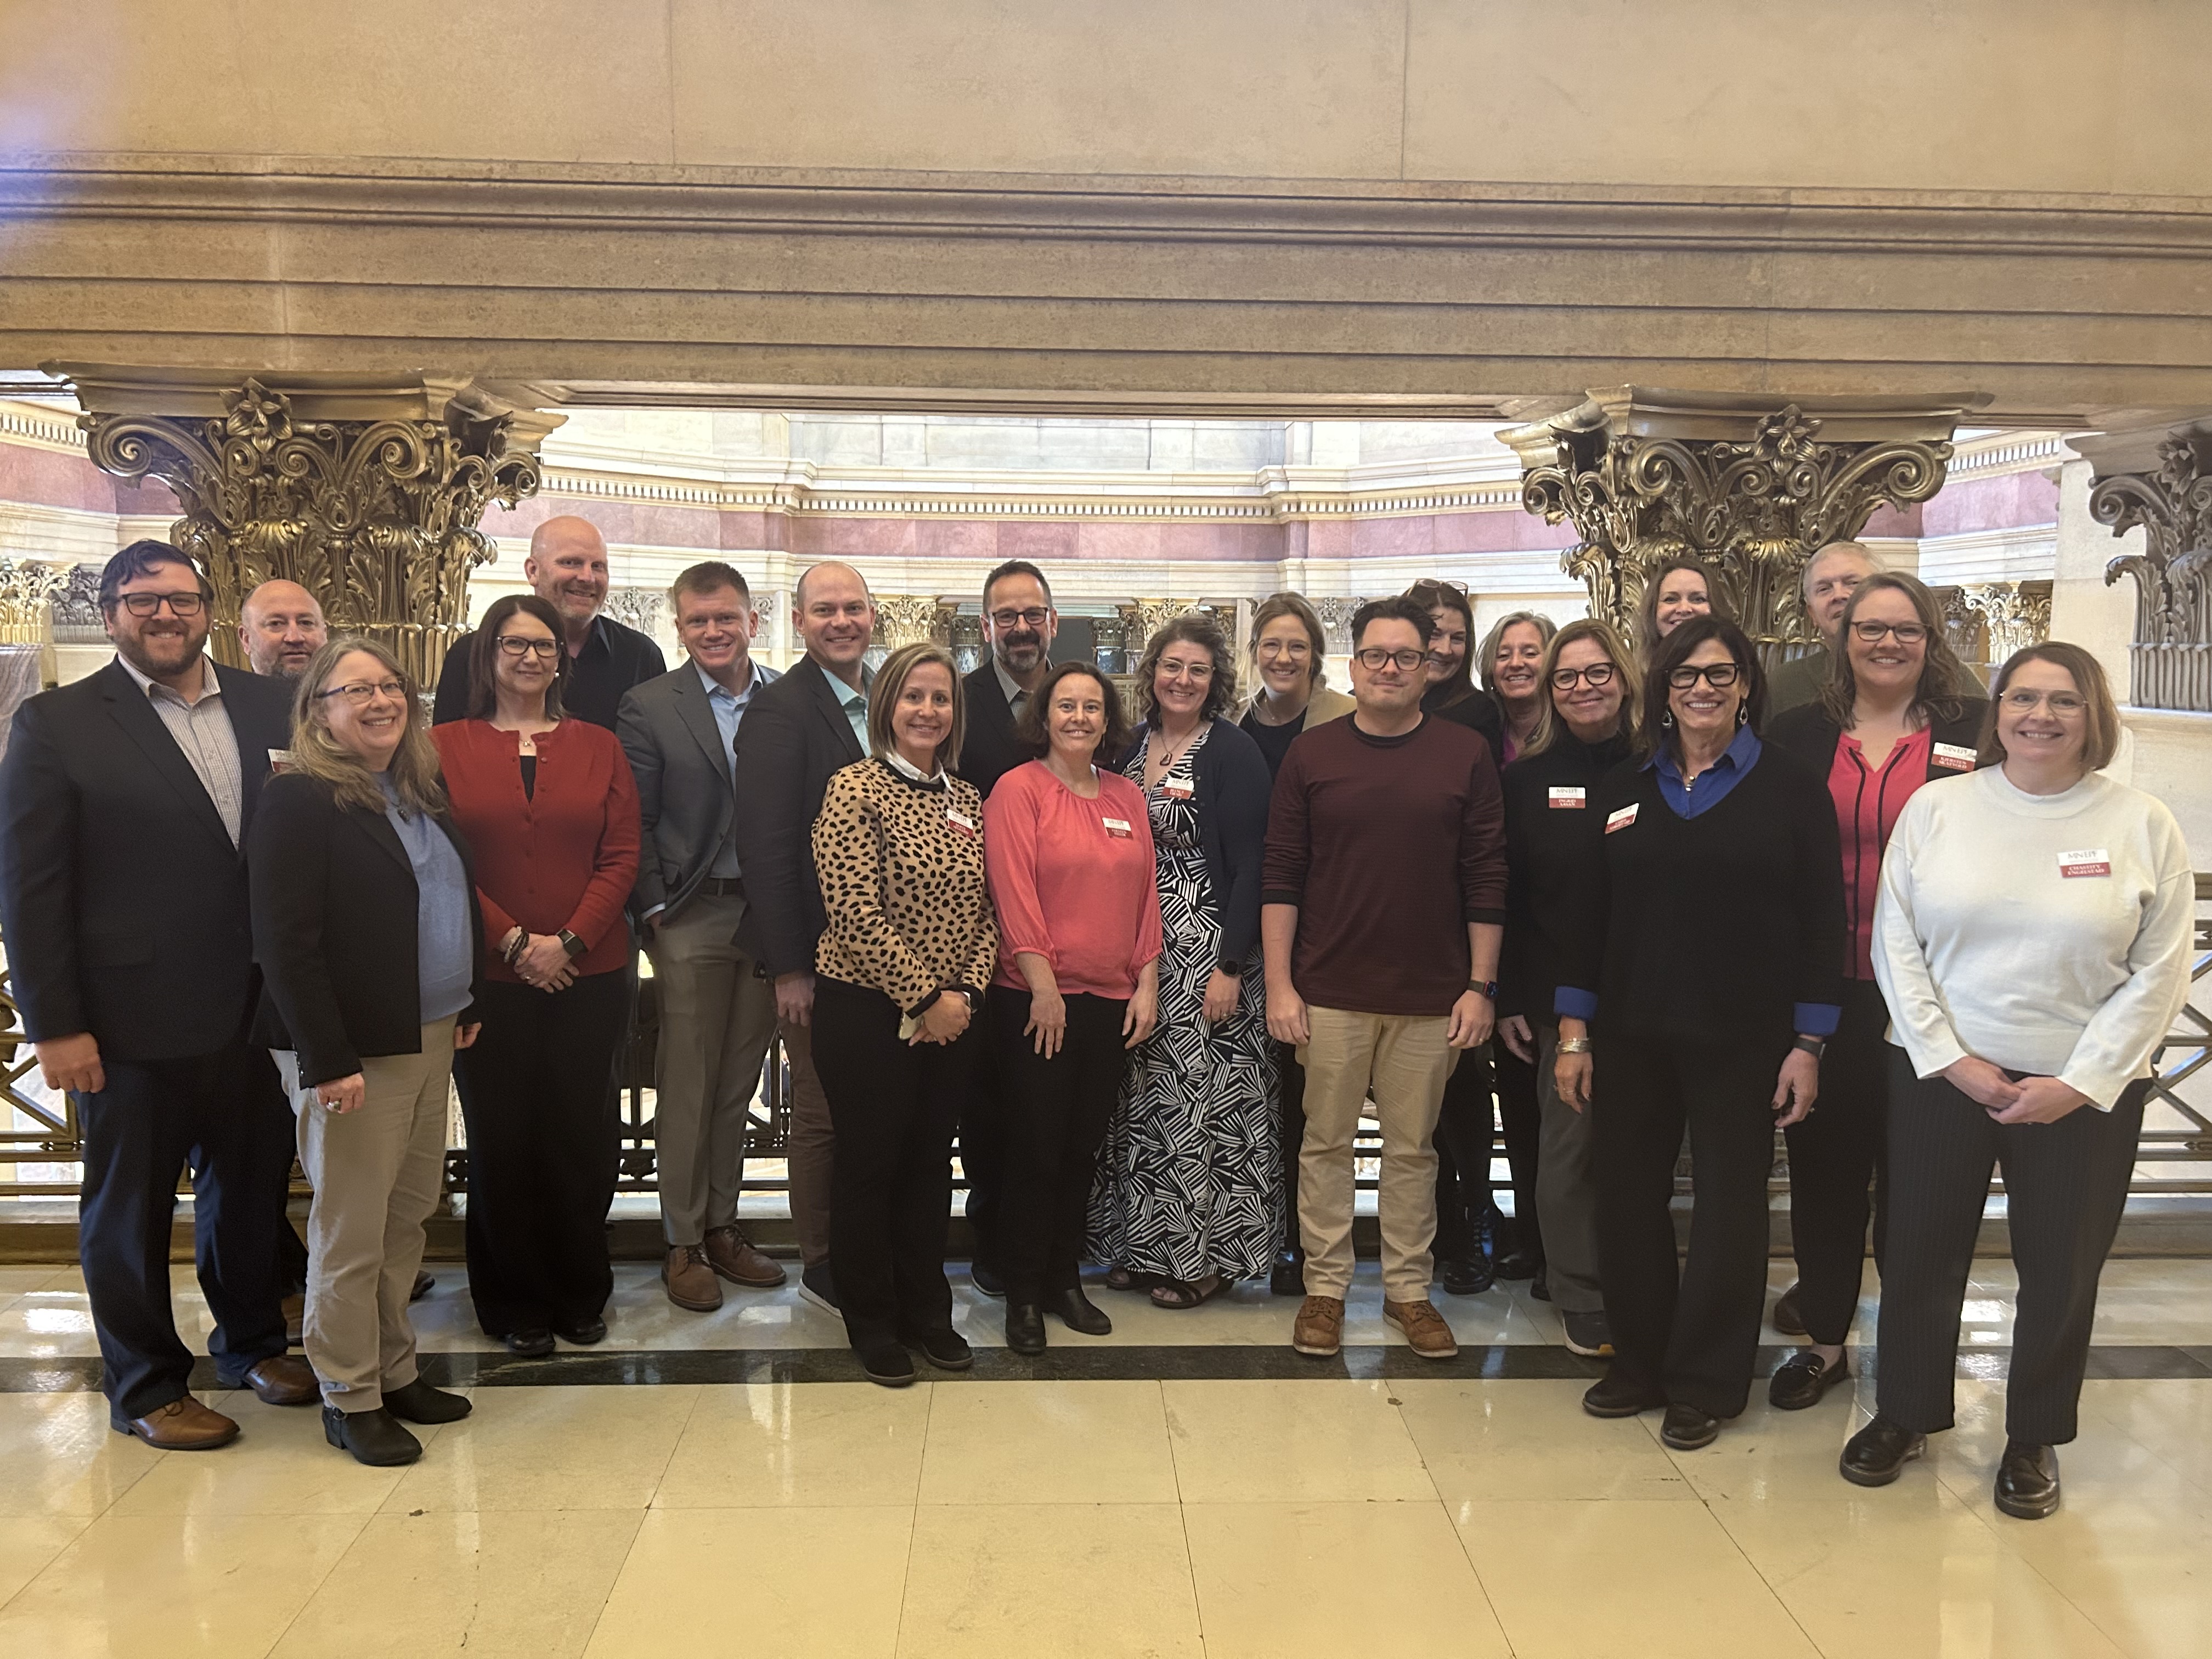 Minnesota Education Policy Fellows at the State Capitol.